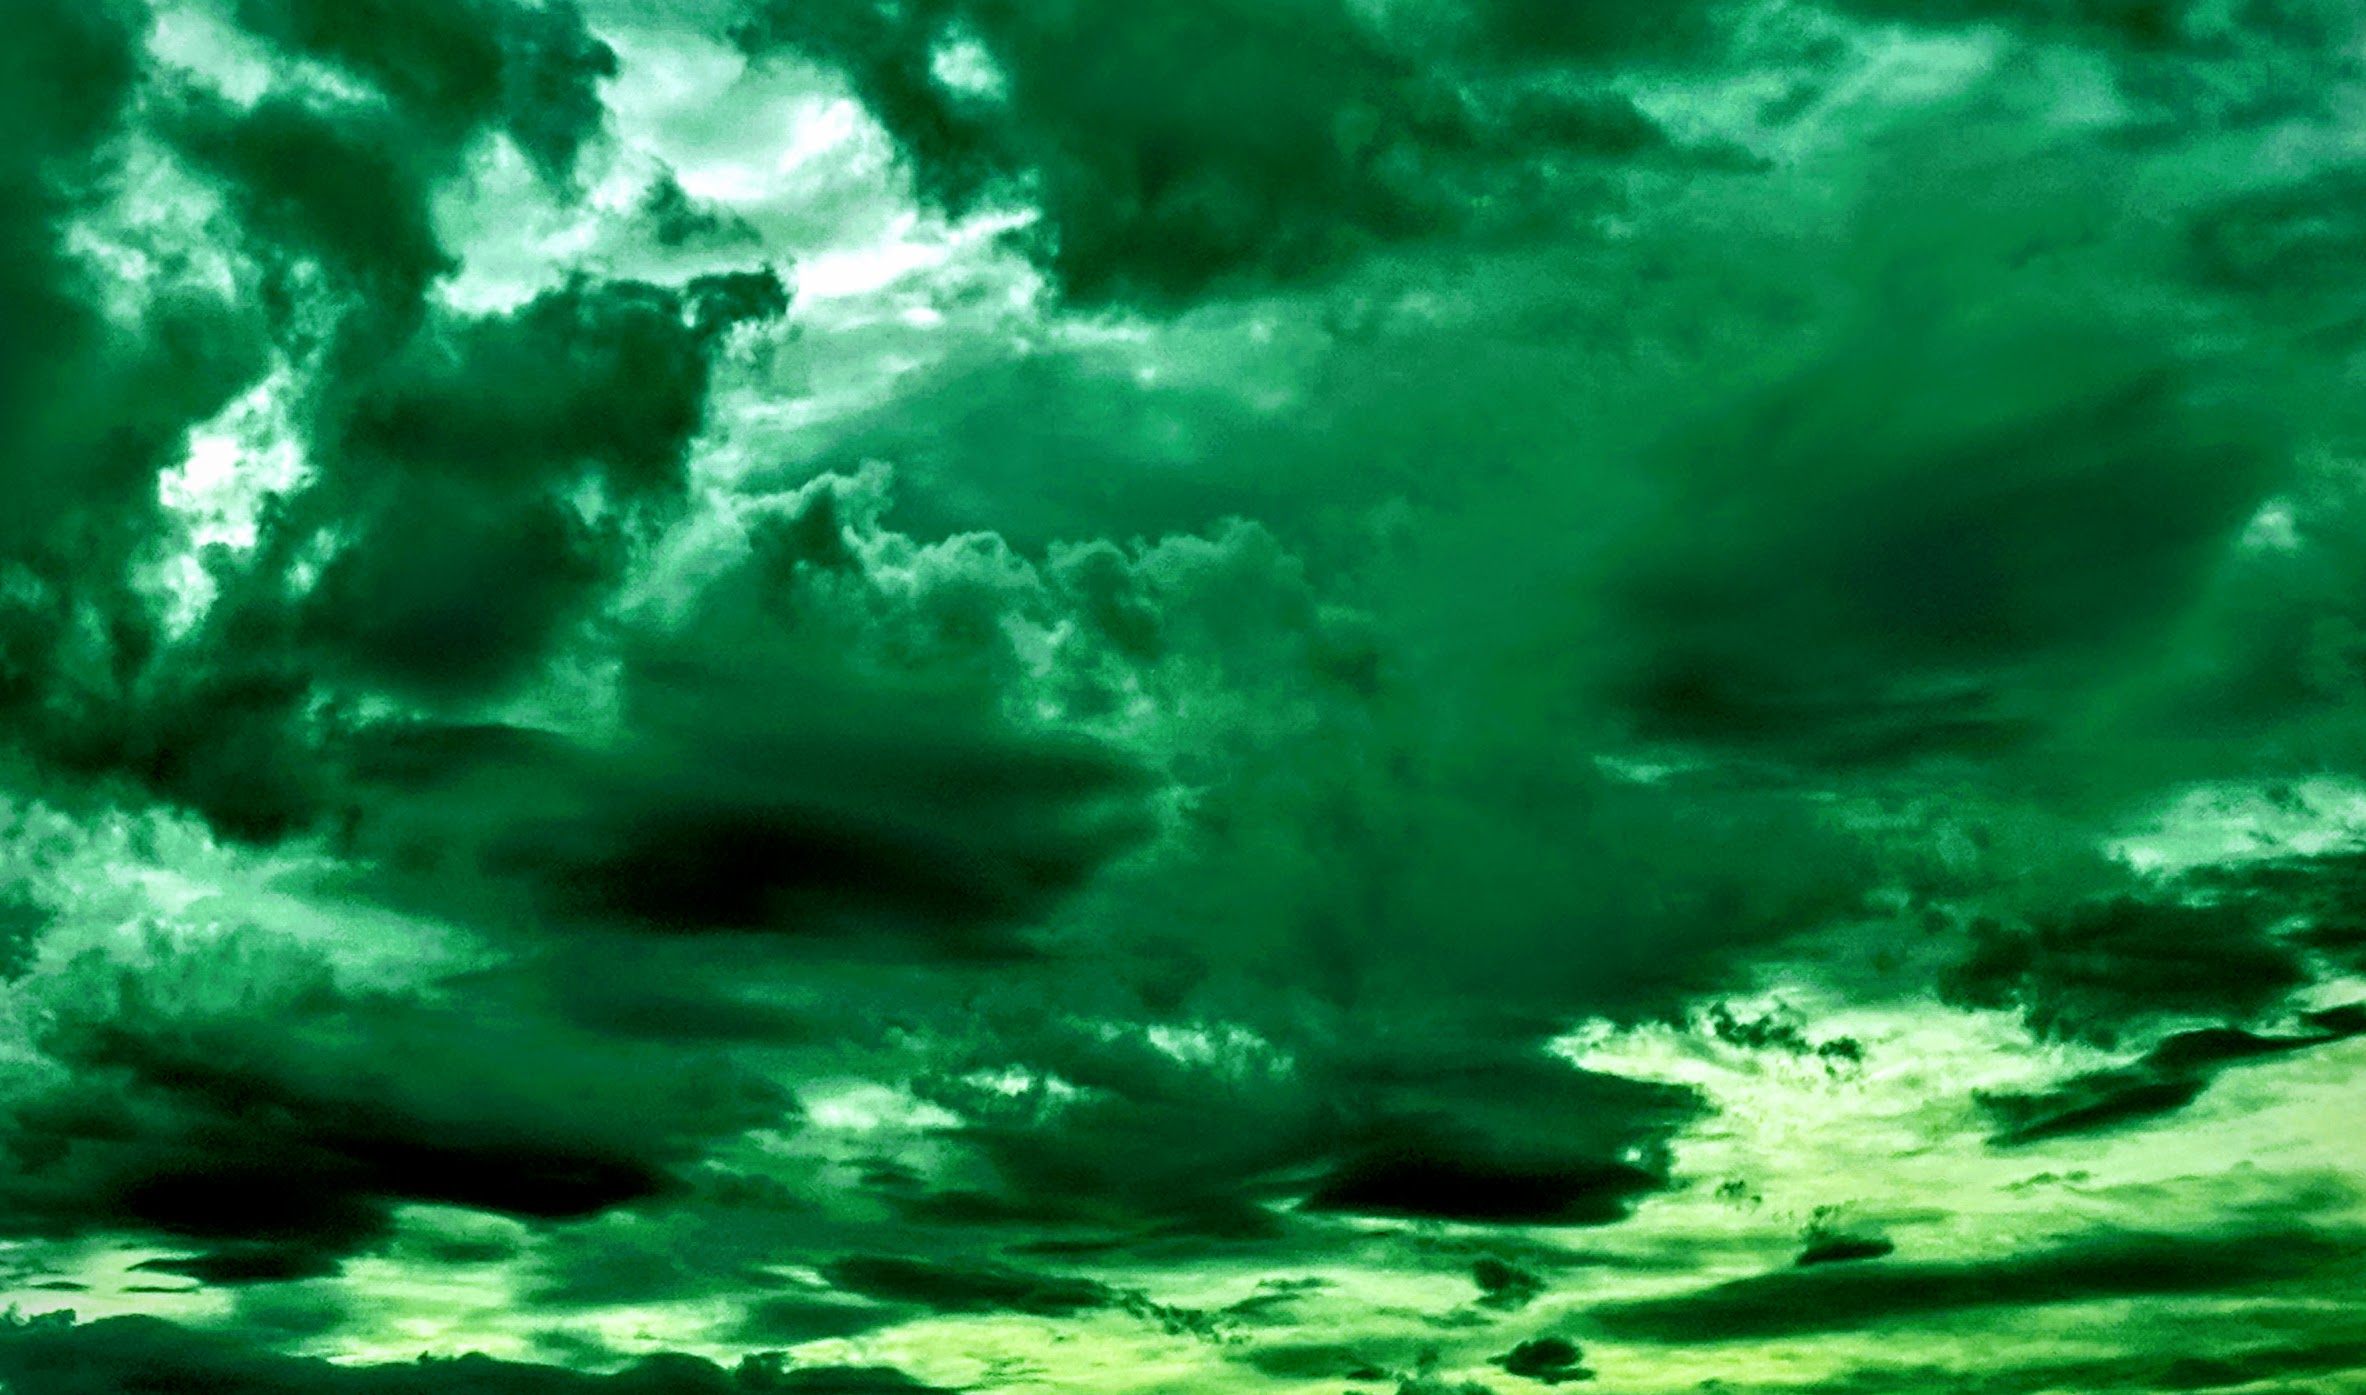 Clouds with a green edit